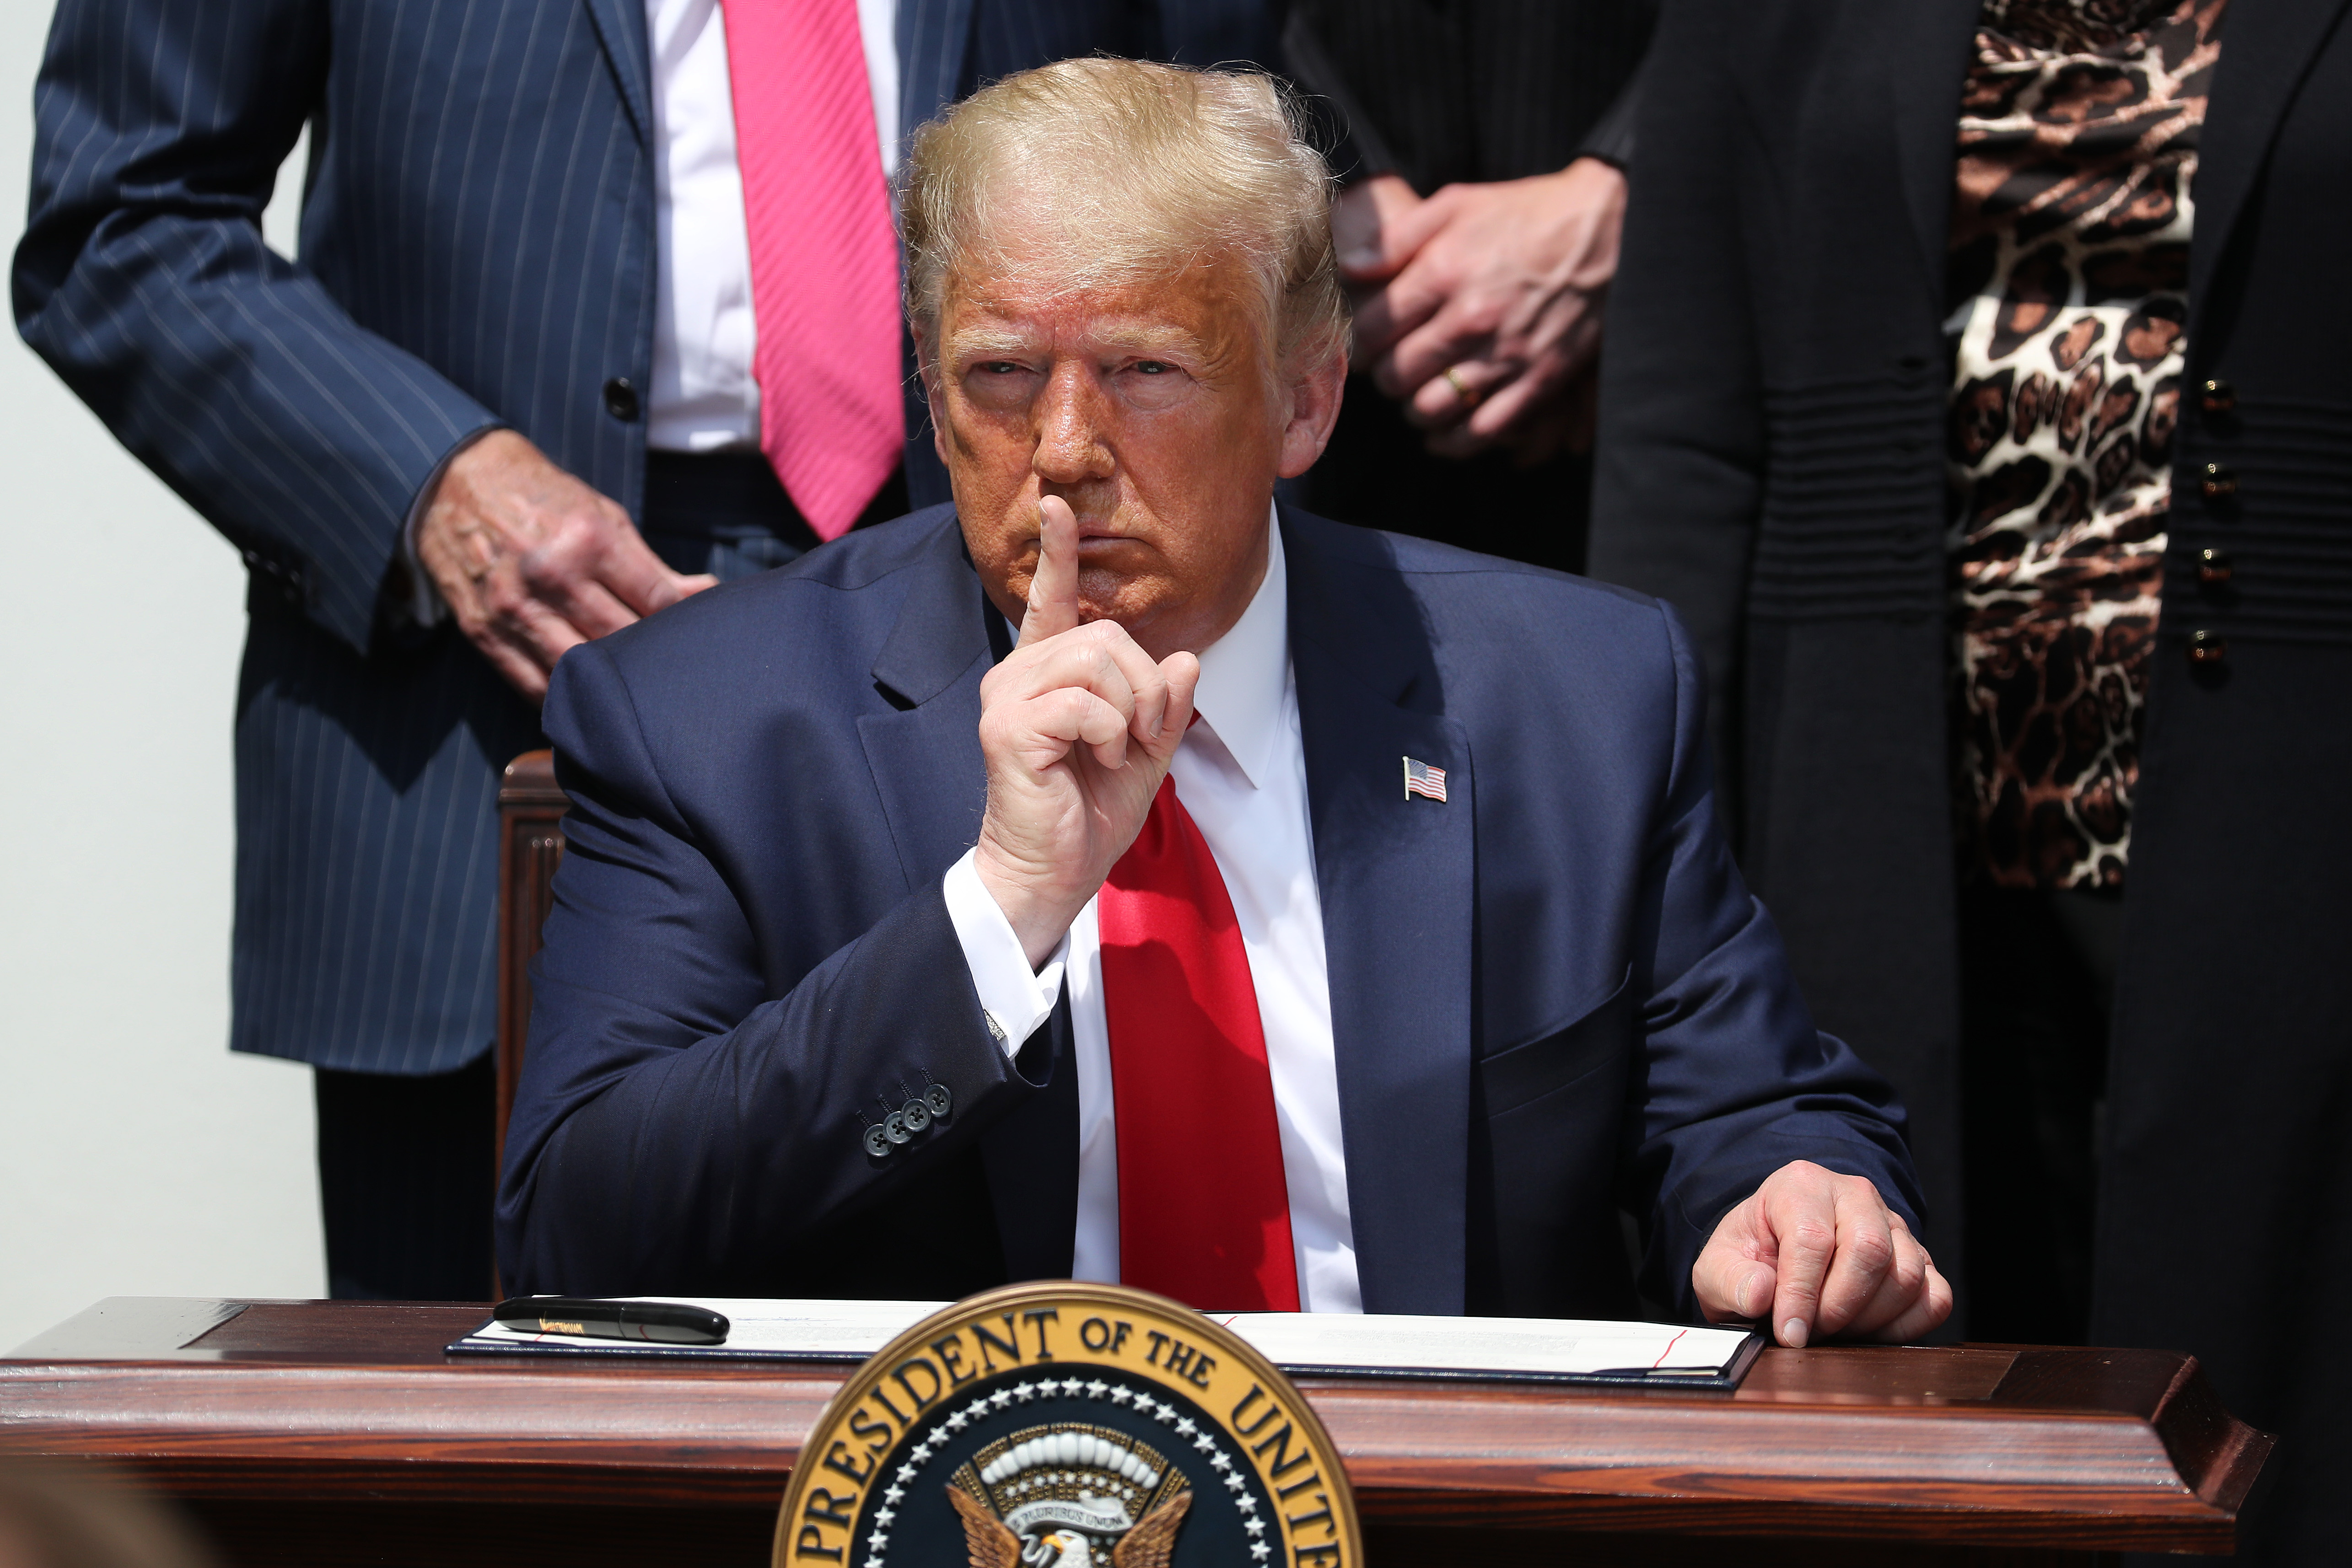 President Trump sitting at a desk holding his finger to his lips in a shushing gesture.